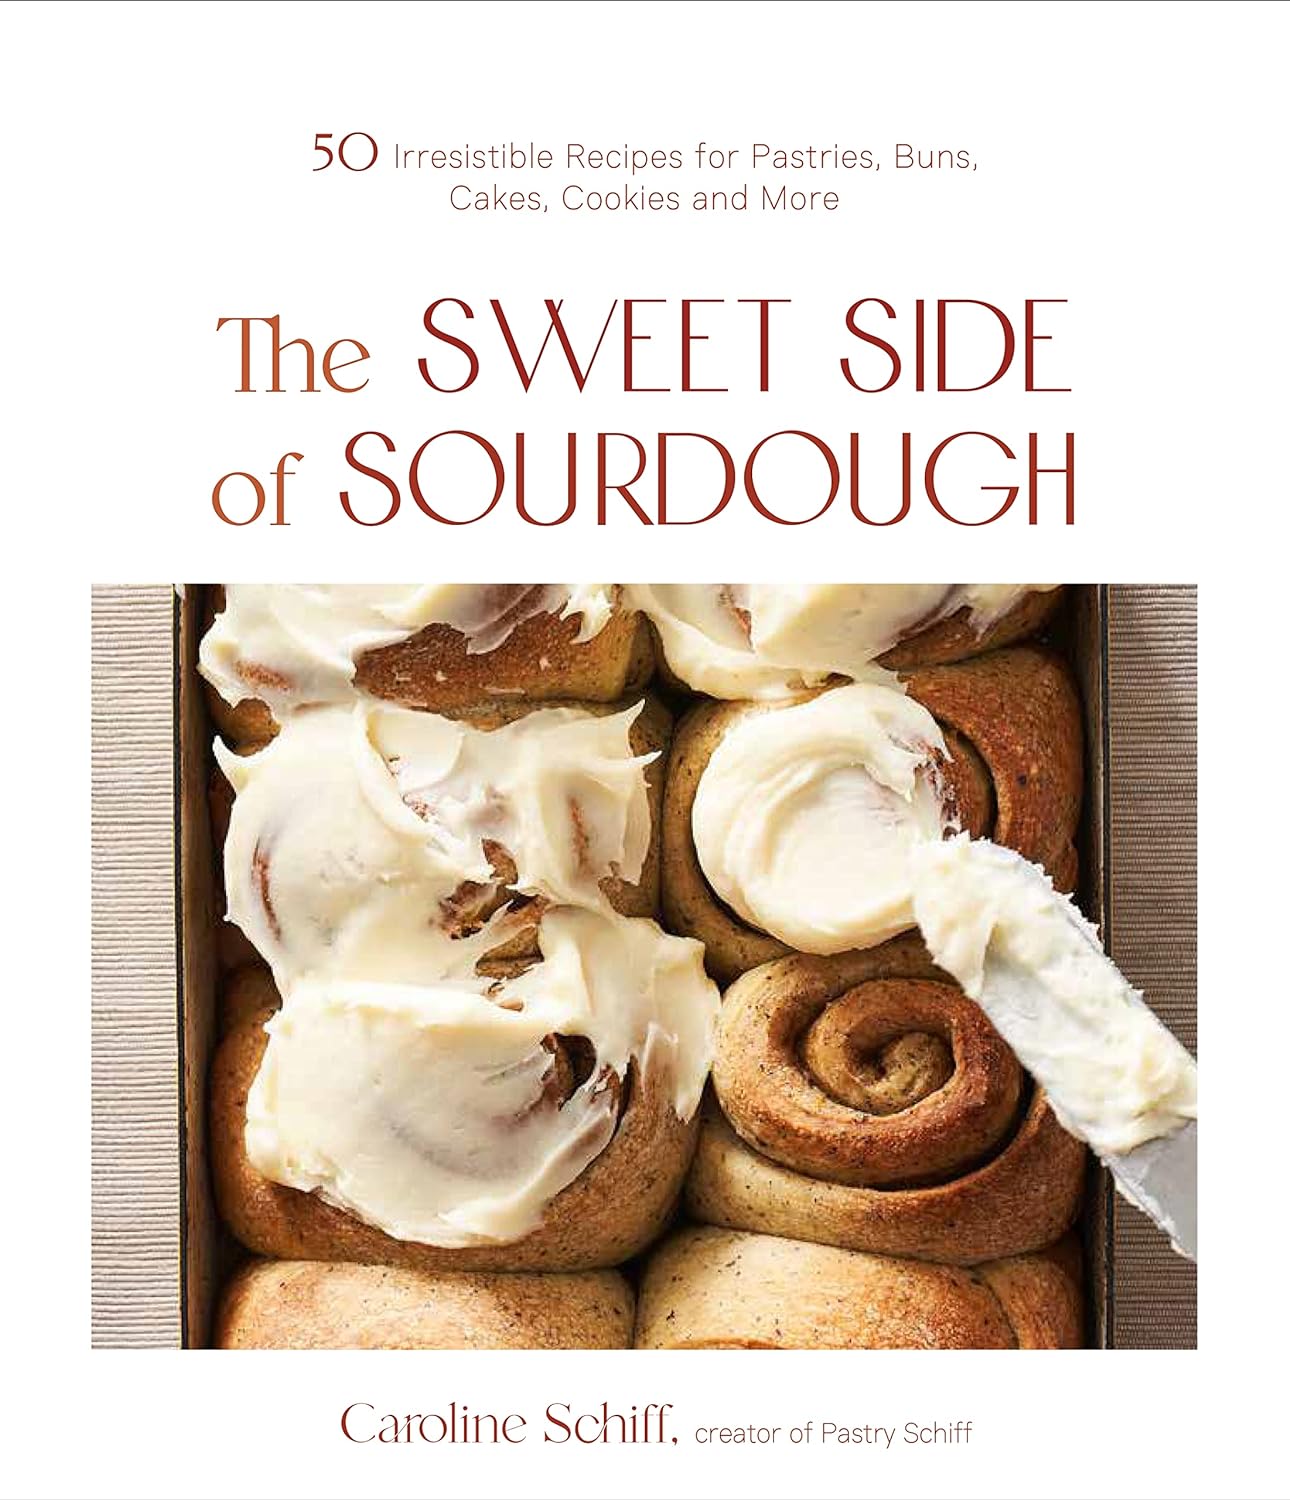 The Sweet Side of Sourdough: 50 Irresistible Recipes for Pastries, Buns, Cakes, Cookies and More - By Caroline Schiff